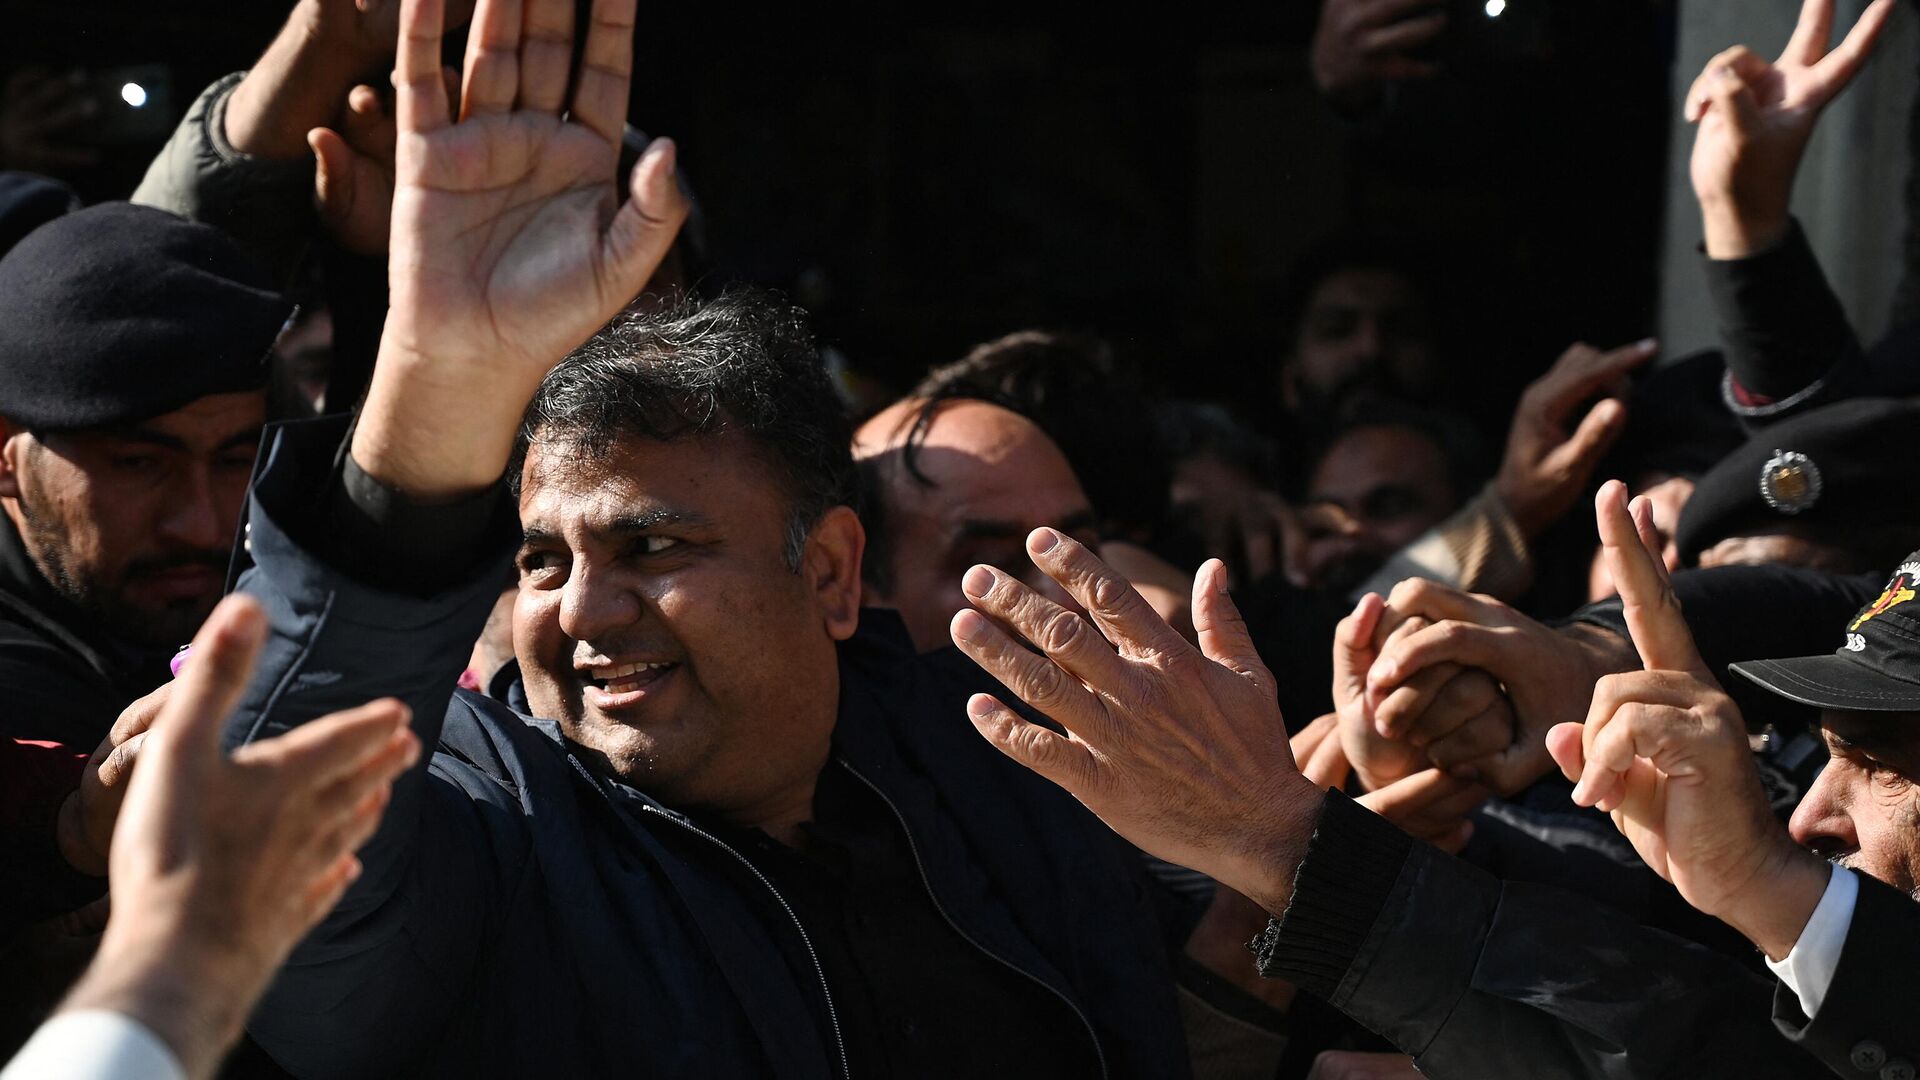 Pakistan's former information minister Fawad Chaudhry (C) gestures as police officials escort him after a hearing at a court in Islamabad on January 27, 2023. - Sputnik India, 1920, 30.01.2023